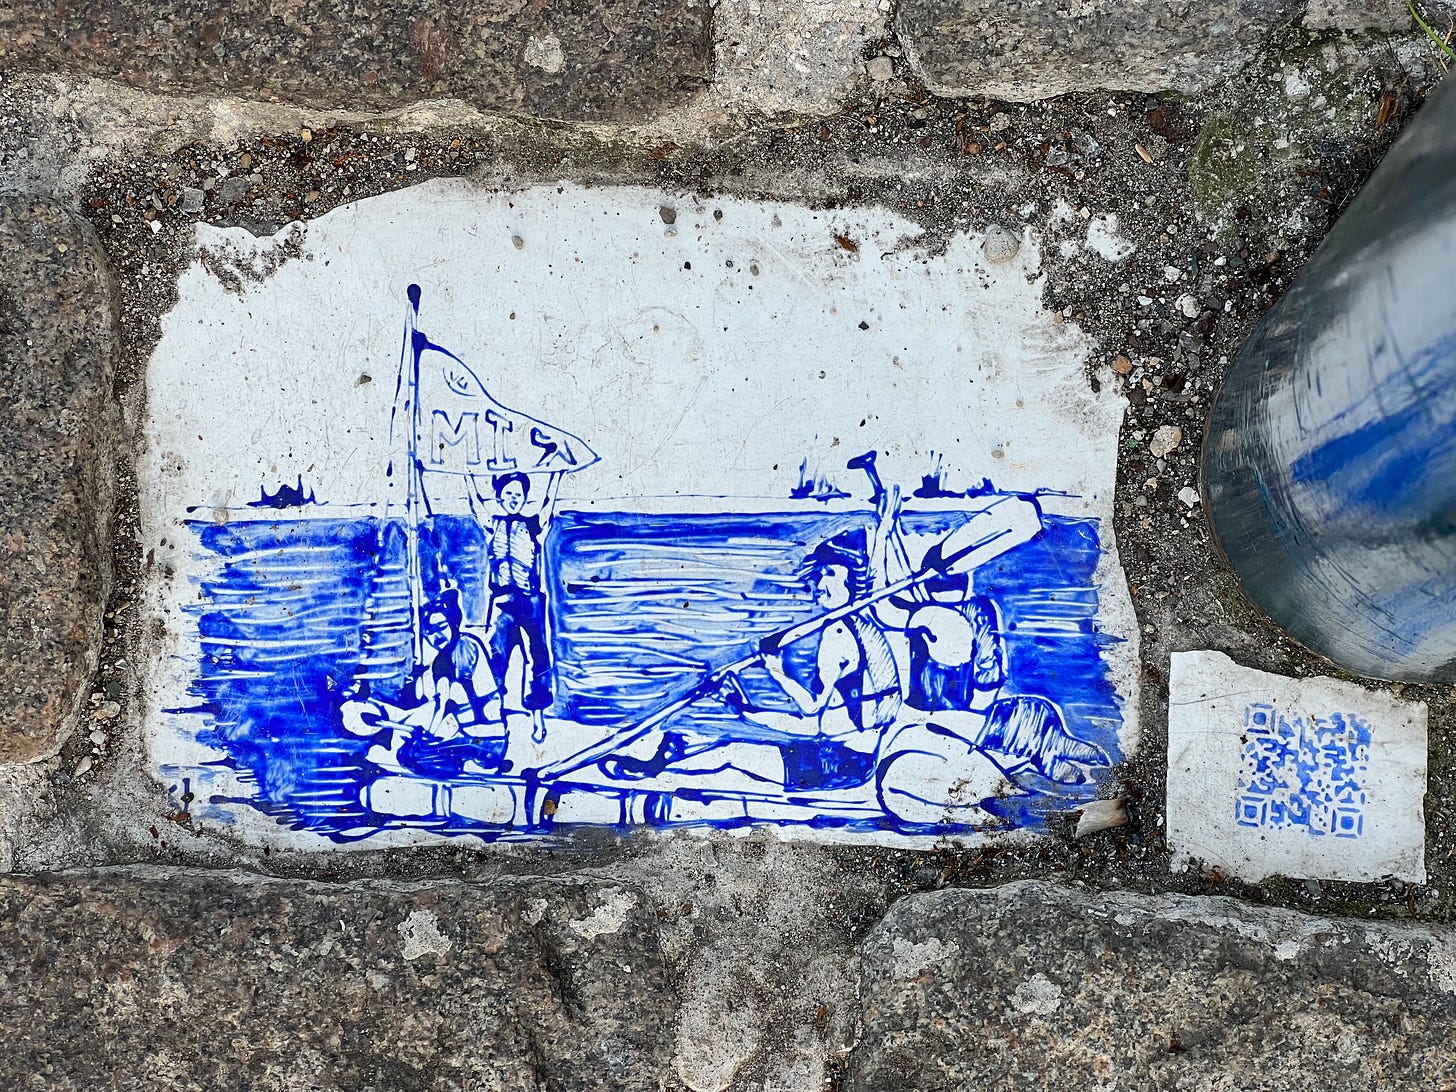 A handpainted tile showing people enjoying a raft on the water. To the right of it is a QR code also handpainted.